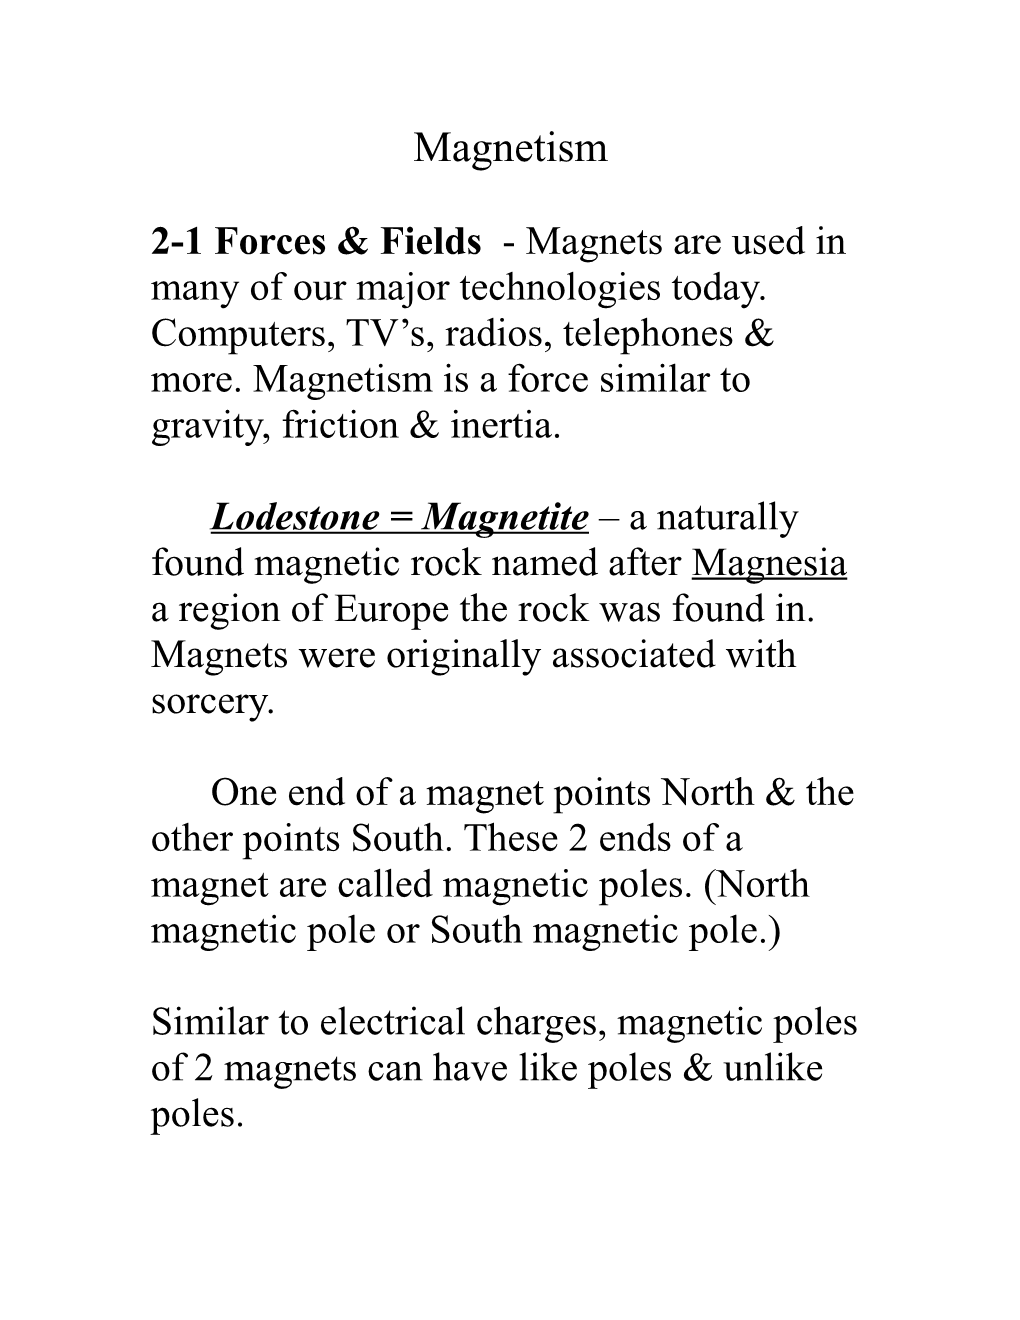 *Like Poles (2 North Poles Or 2 South Poles) Repel